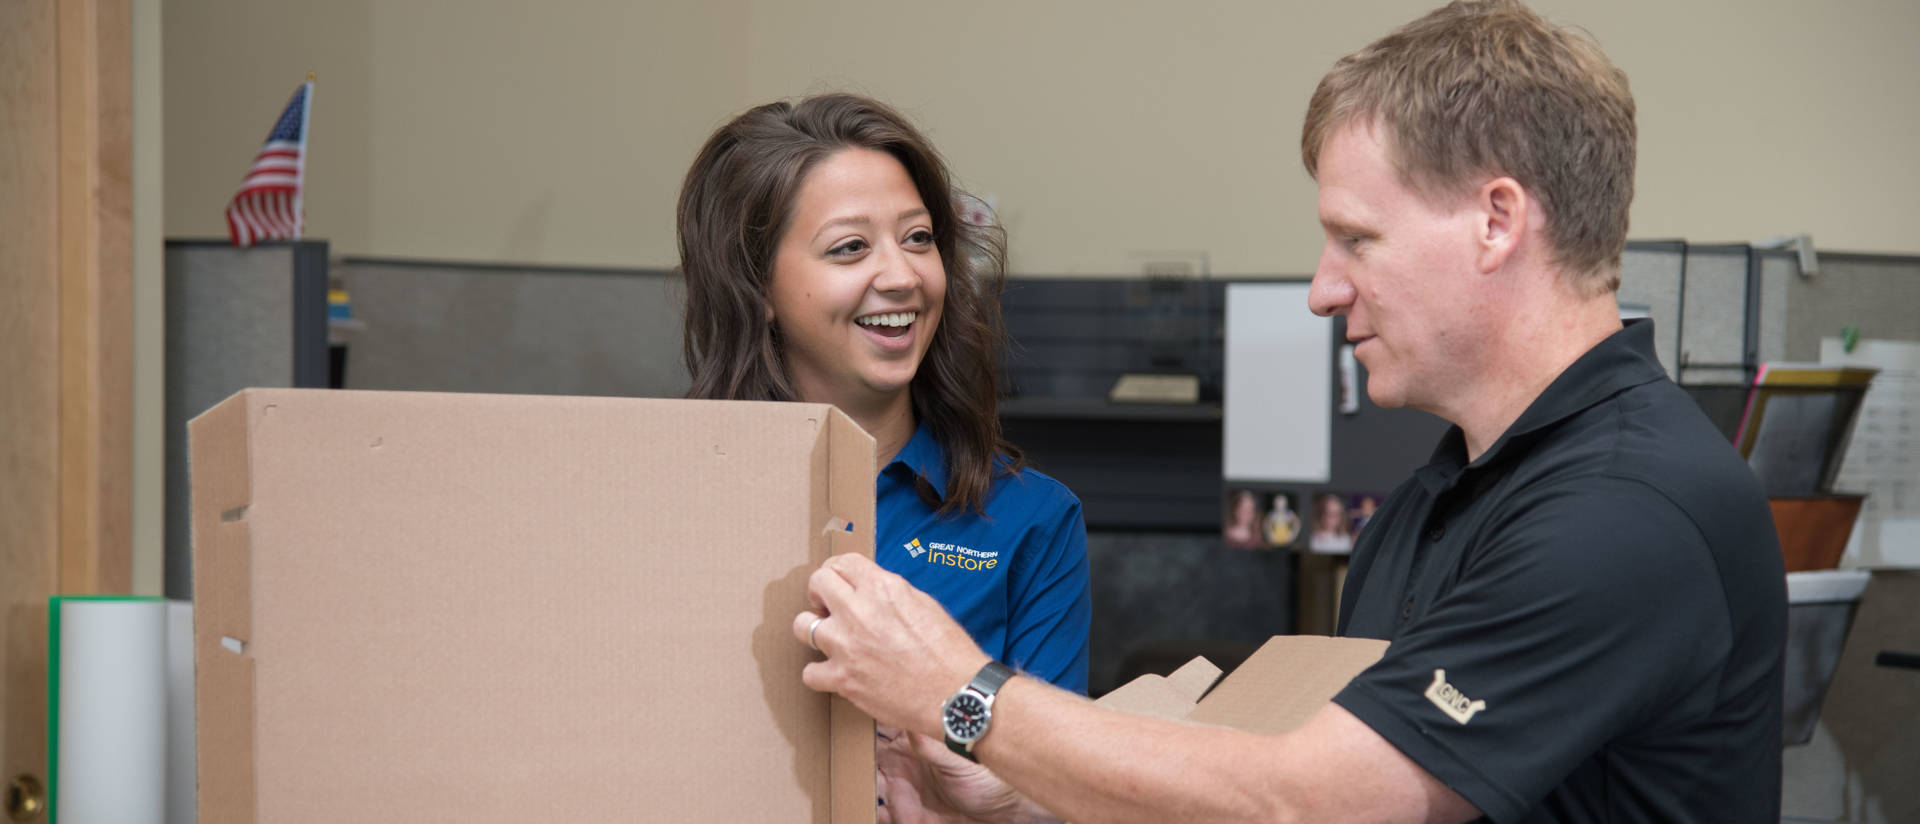 Woman and man working together to fold box